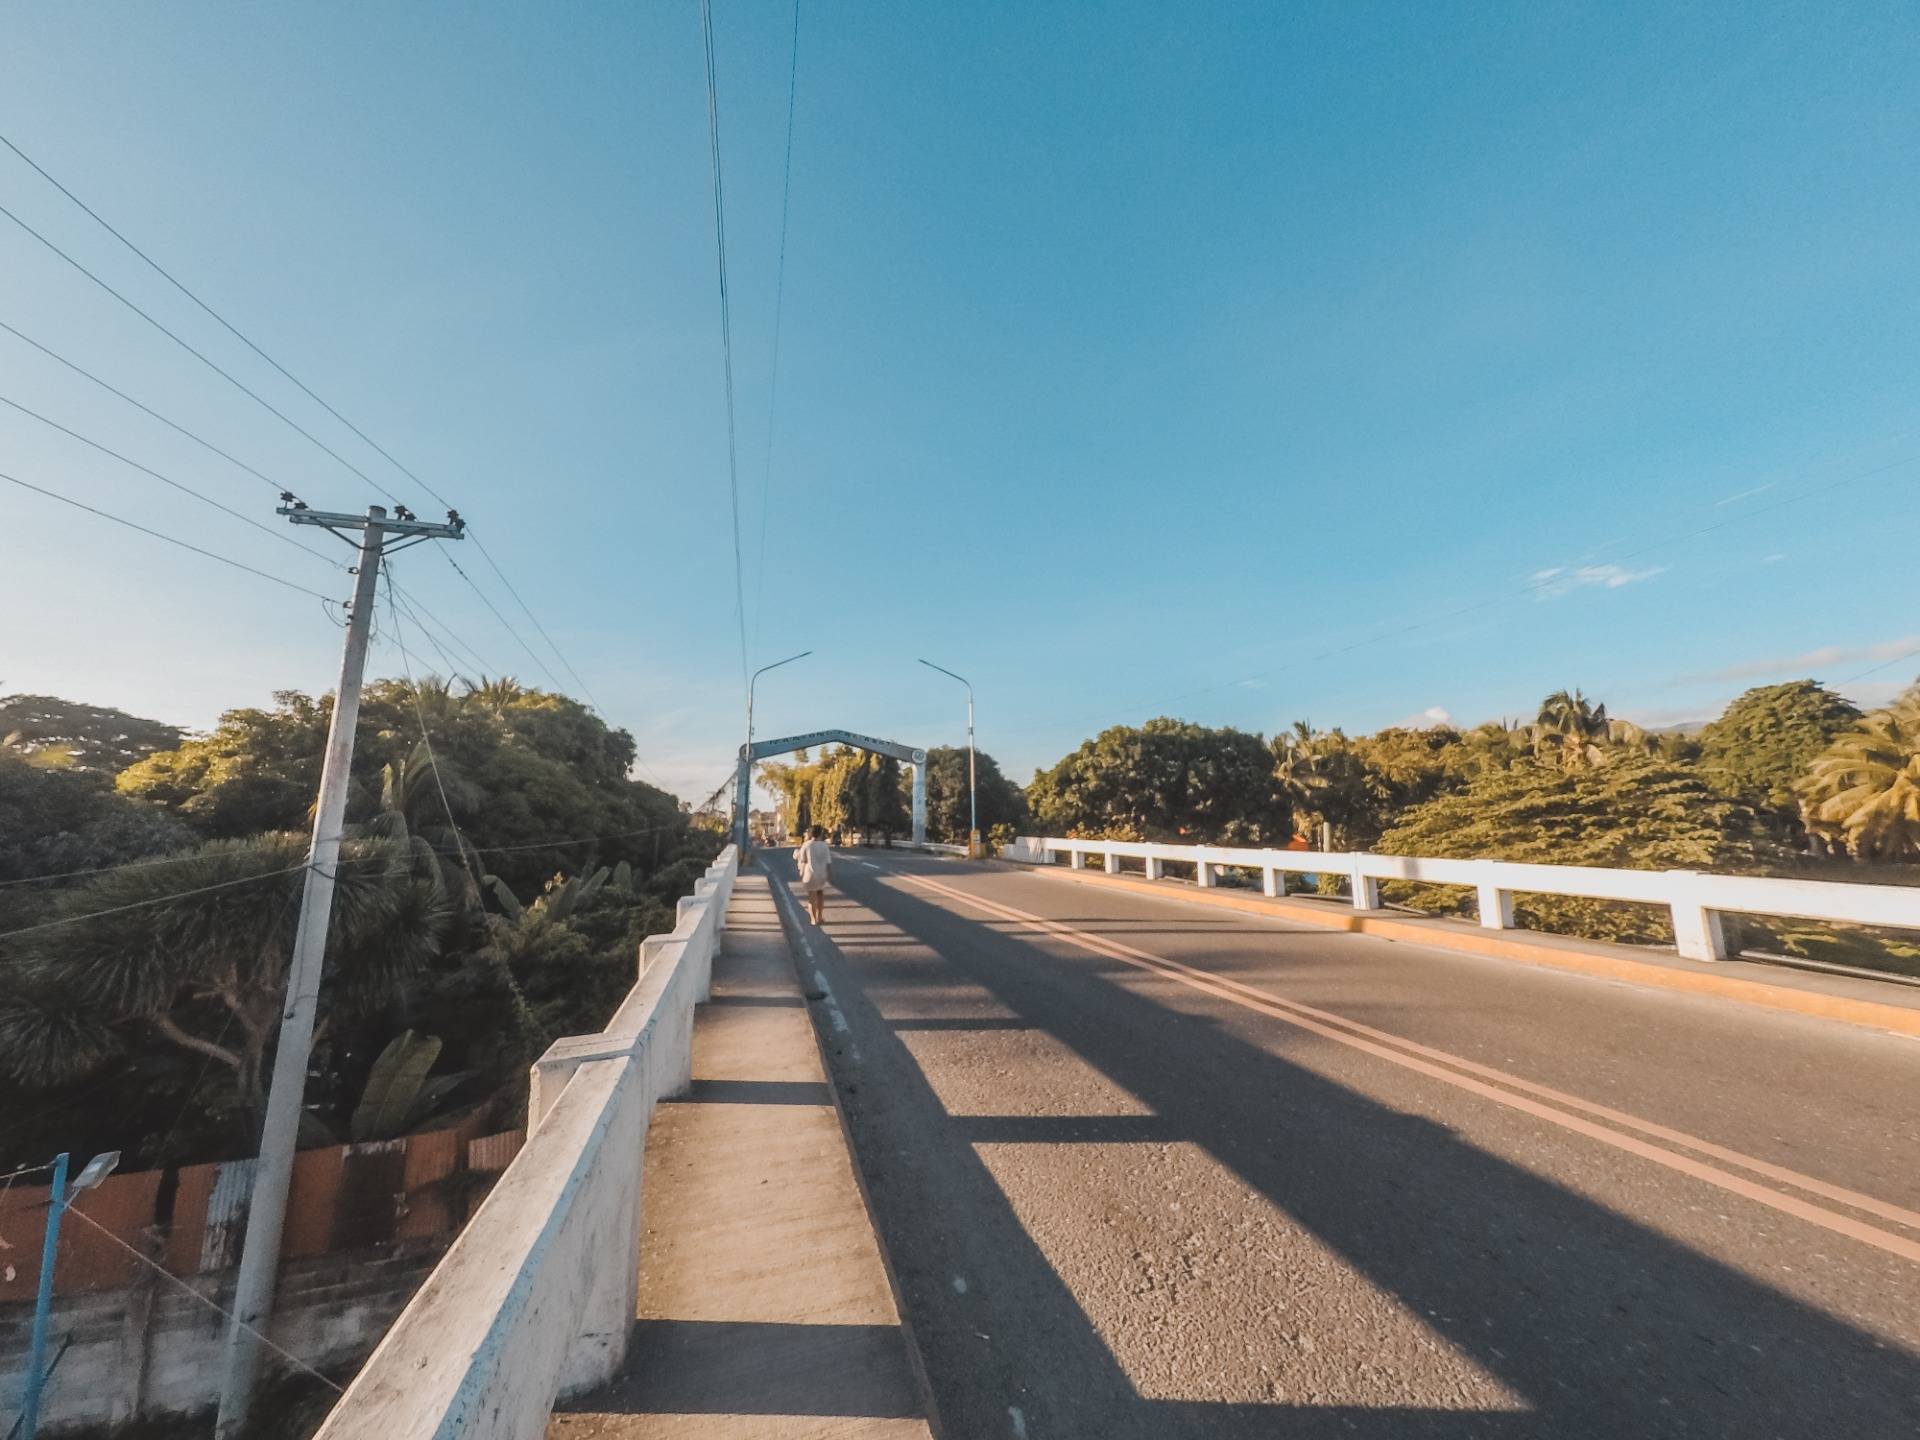 shot with GoPro Hero 5 (Dalaguete Tapon Bridge) photography by me